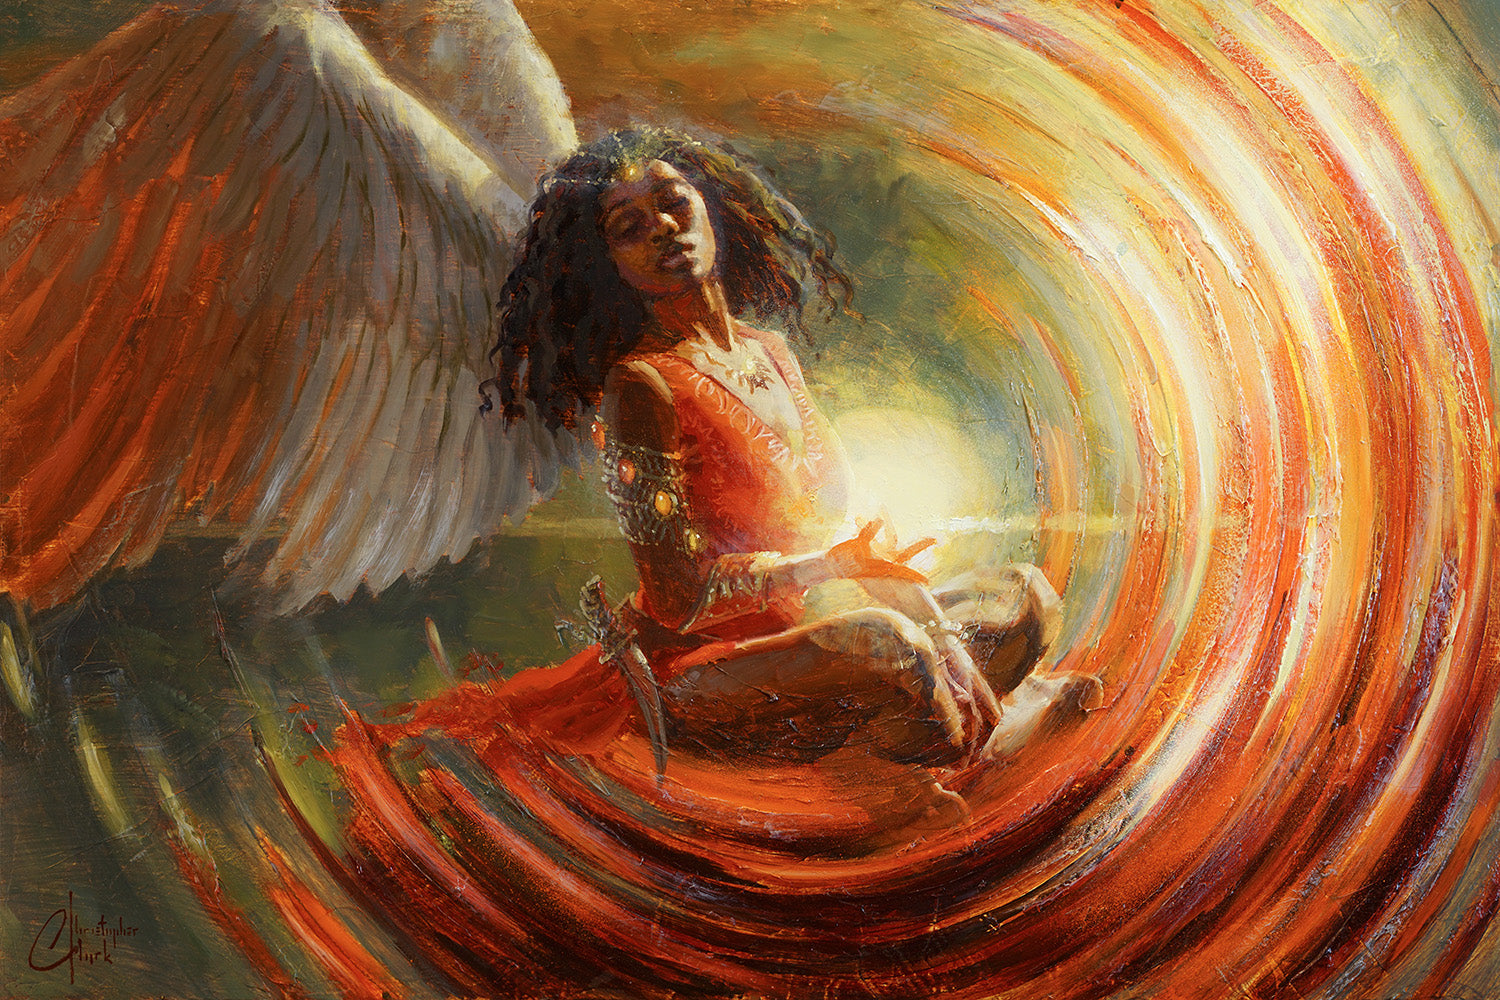 Angelic Sorceress 18"x27" Oil on Wood Panel by Christopher Clark